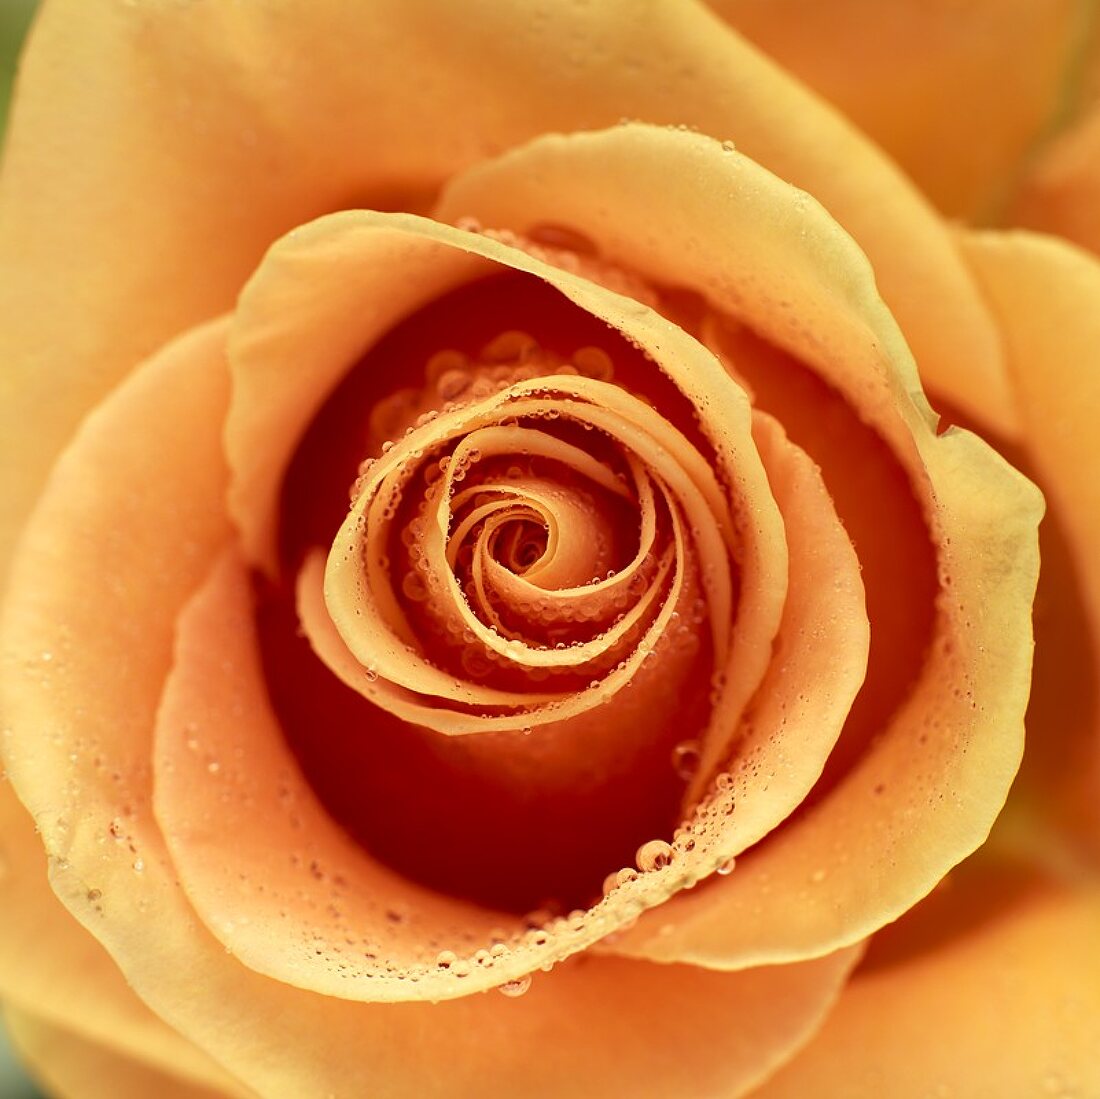 Salmon-pink rose with drops of water (close-up)